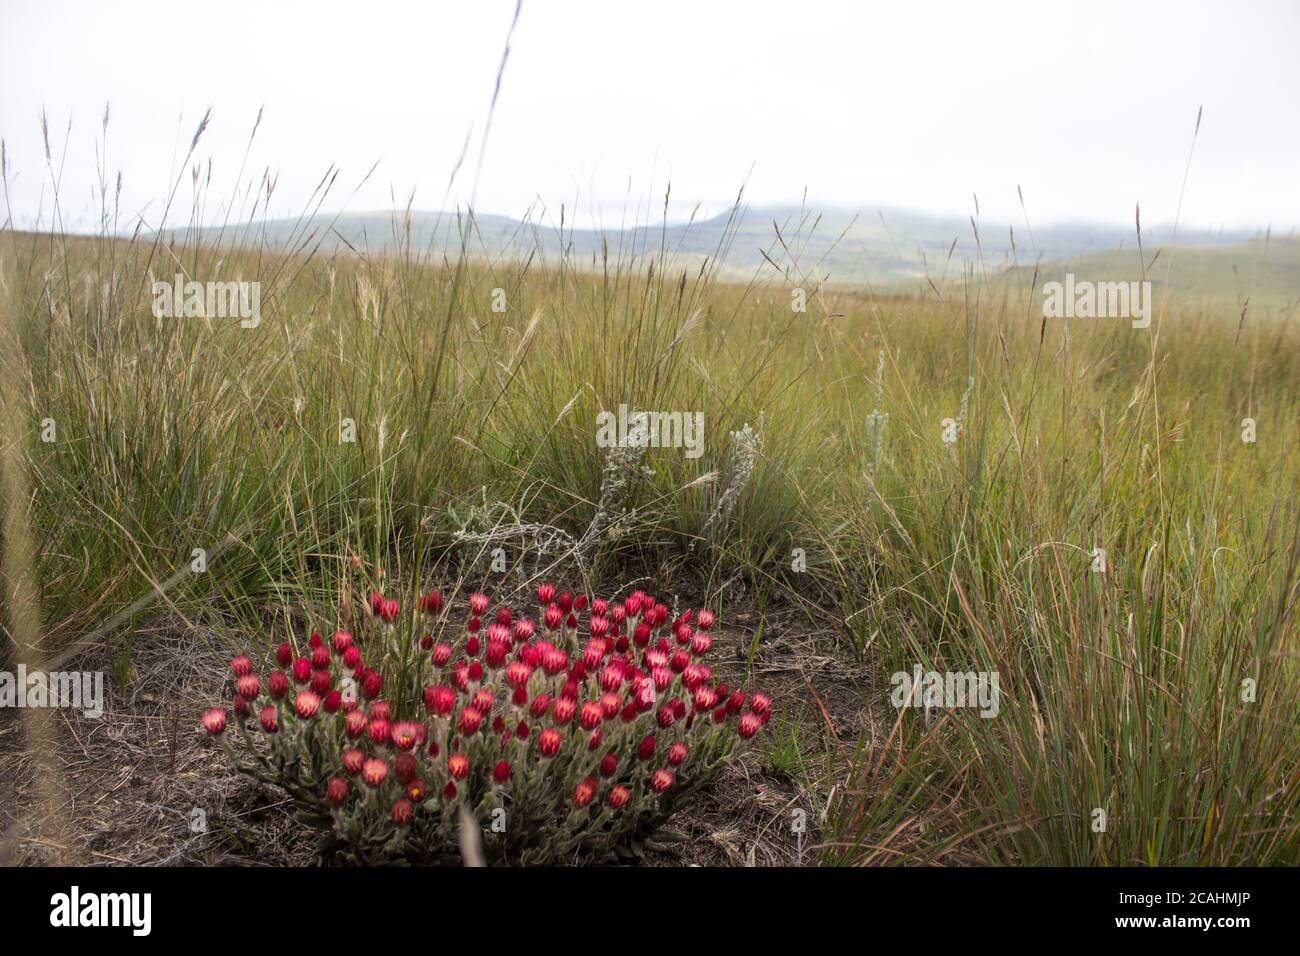 The Afro-alpine grassland of the Southern Drakensberg Mountains, South Africa, with a pink everlasting bush, Zaluzianskya Microsiphon, in full bloom i Stock Photo